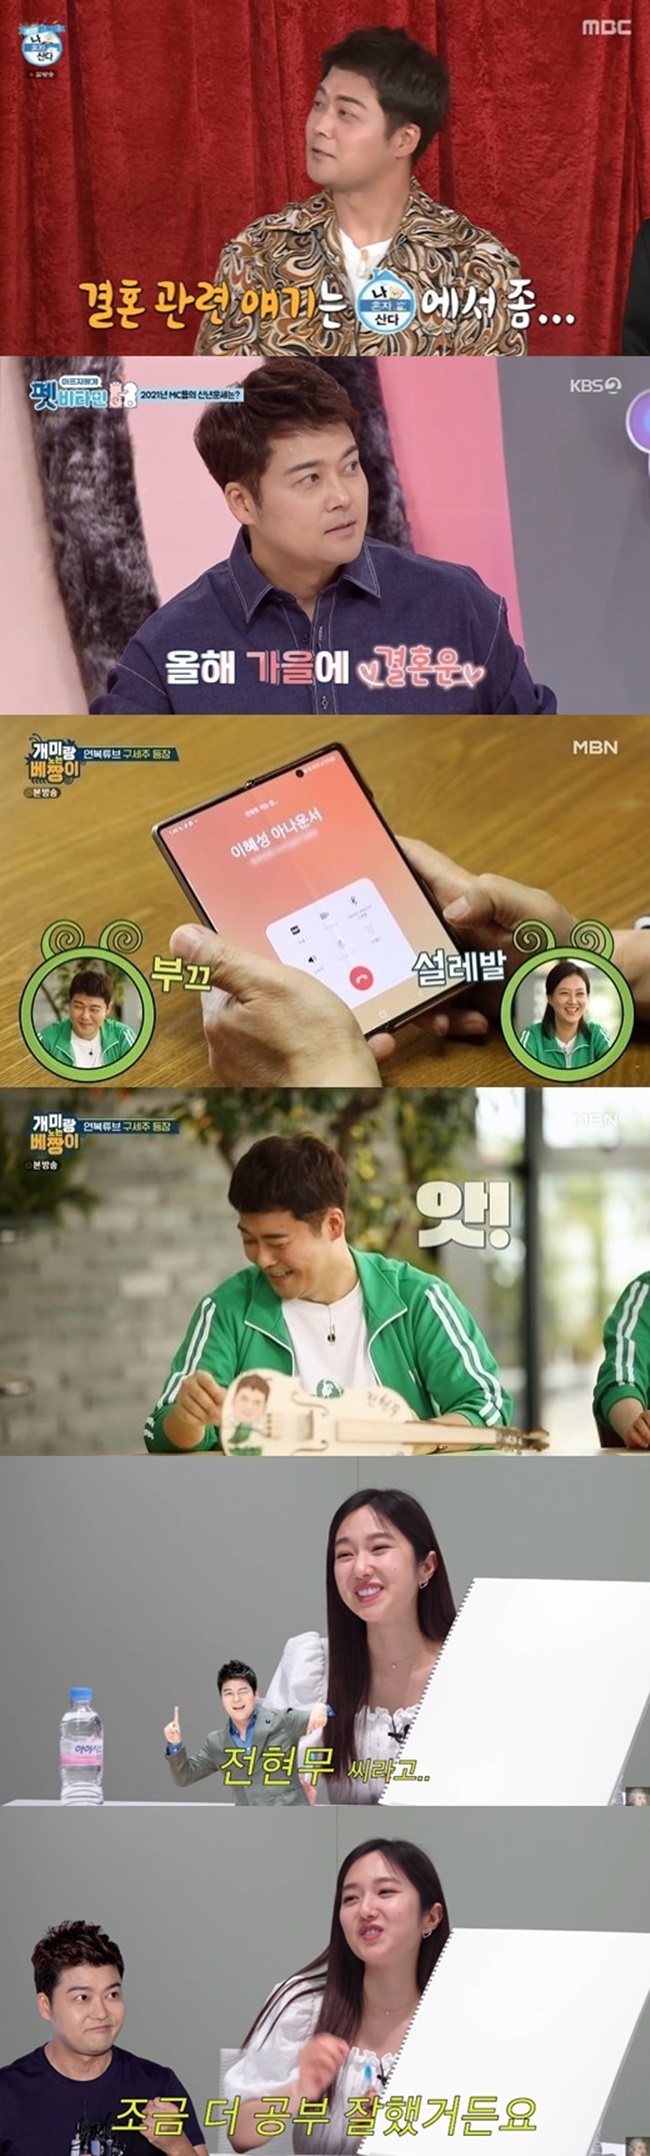 Jun Hyun-moo, Lee Hye-sungs raucous public love beyond the sweetness of the moon. When will it be quiet?On the MBN Antranging Grasshopper broadcast on June 21, Jun Hyun-moo was ashamed to blush when chef Lee Yeon-bok called Lee Hye-sung.When Lee Hye-sung spoke with Lee Yeon-bok affectionately, Jun Hyun-moo boasted that I still get it nice to me.On this day, it was the first broadcast of Antang playing grasshopper, but Jun Hyun-moo mentioned Lee Hye-sung at the top of various portal site entertainment articles.As Jun Hyun-moo and Lee Hye-sung public love are emphasized, interest in the program itself is relatively backward.It is a considerable blow to the entertainment program that the first broadcast soon becomes the first impression.Its not a day or two before Jun Hyun-moo, Lee Hye-sung, mention each other in an entertainment program.Lee Hye-sung appeared on the YouTube channel Study King Jin-jae Hong Jin-kyung on June 14 and mentioned Jun Hyun-moo as a teacher candidate.If you are confident that you will teach better than me, please appear, he wrote a video letter.Recently, Jun Hyun-moo also boasted of Lee Hye-sung and his still affectionate love affair, saying, I live alone (Nahon Mountain), which returned in two years and three months, I will talk about marriage in wartime .Jun Hyun-moo, Lee Hye-sung continues to refer to each other and make a set-like impression.Even if a person appears, a reference to the other person who is a lover is drawn naturally. It can be diagnosed as inappropriate for a performer who has to show various talk according to the program.The bigger problem is that viewers are also complaining of fatigue in the loud public love of the two.As well as Jun Hyun-moo, who has so many programs, Lee Hye-sung, who has been in the first year of the pre-declaration, is forced to feel bored when he takes out his lover card like a desperate one.It is also a natural reaction that their interest in love has faded as it has been about a year and a half since it was released.Public Love is free, but you have to distinguish between the ball and the living. Viewers dont watch entertainment programs to watch Jun Hyun-moo, Lee Hye-sung love stories.The way of directing the two people somehow, and the two people who respond to it should feel the sense of problem.Public Love Even married couples need to think of reasons why they do not want to mention each other on the air.Work and love, in order to catch both rabbits, a cool sense that does not confuse the two is required.Jun Hyun-moo and Lee Hye-sung will stop making mistakes in shooting romance dramas in the background of entertainment and hope to be reborn as broadcasters who do their best in their respective positions.